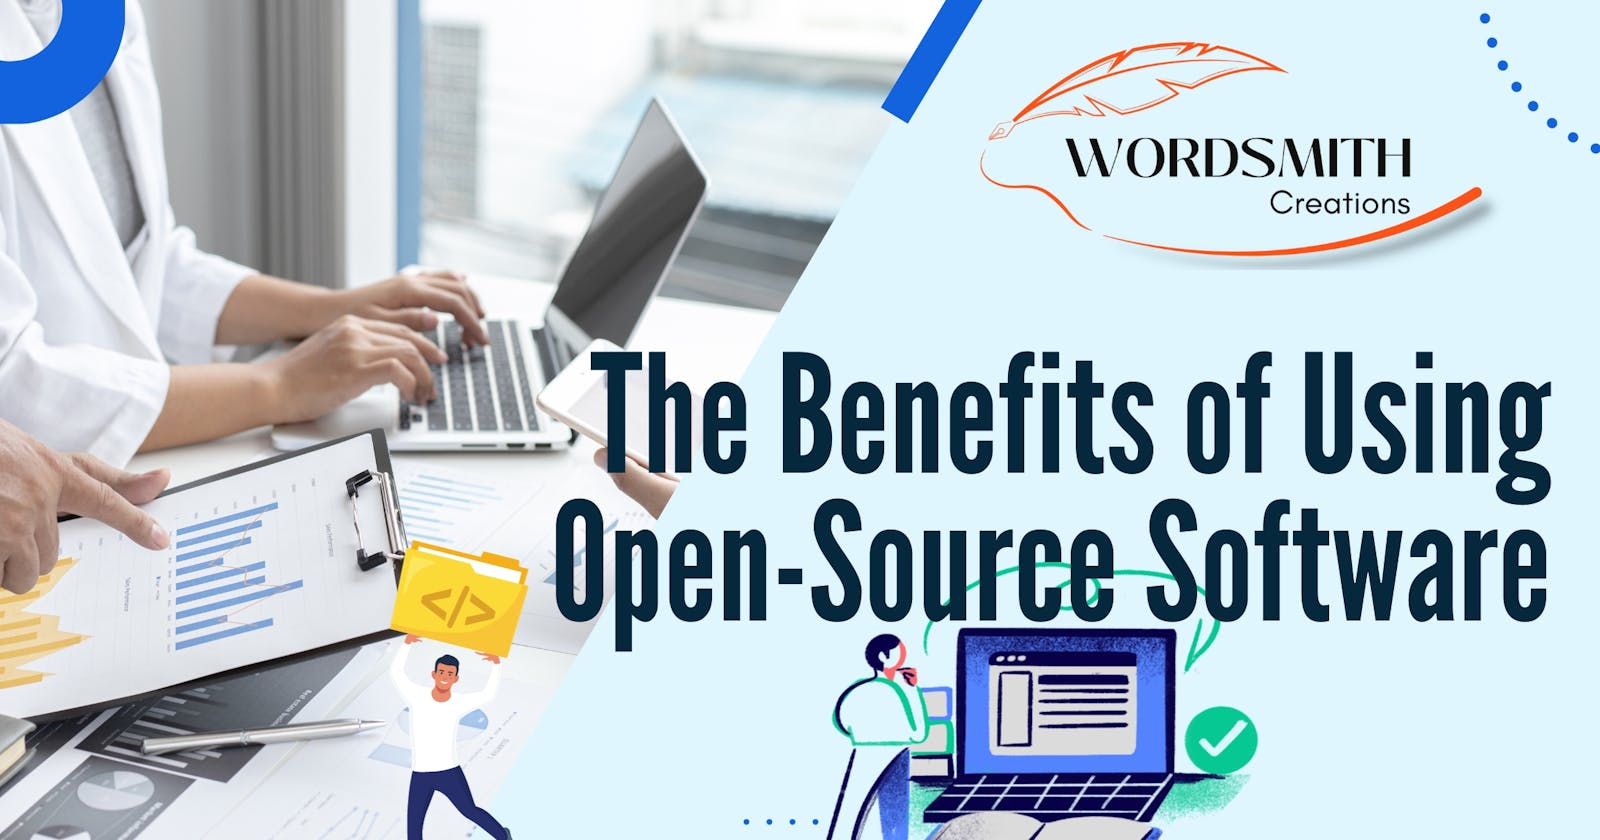 The Benefits of Using Open-Source Software